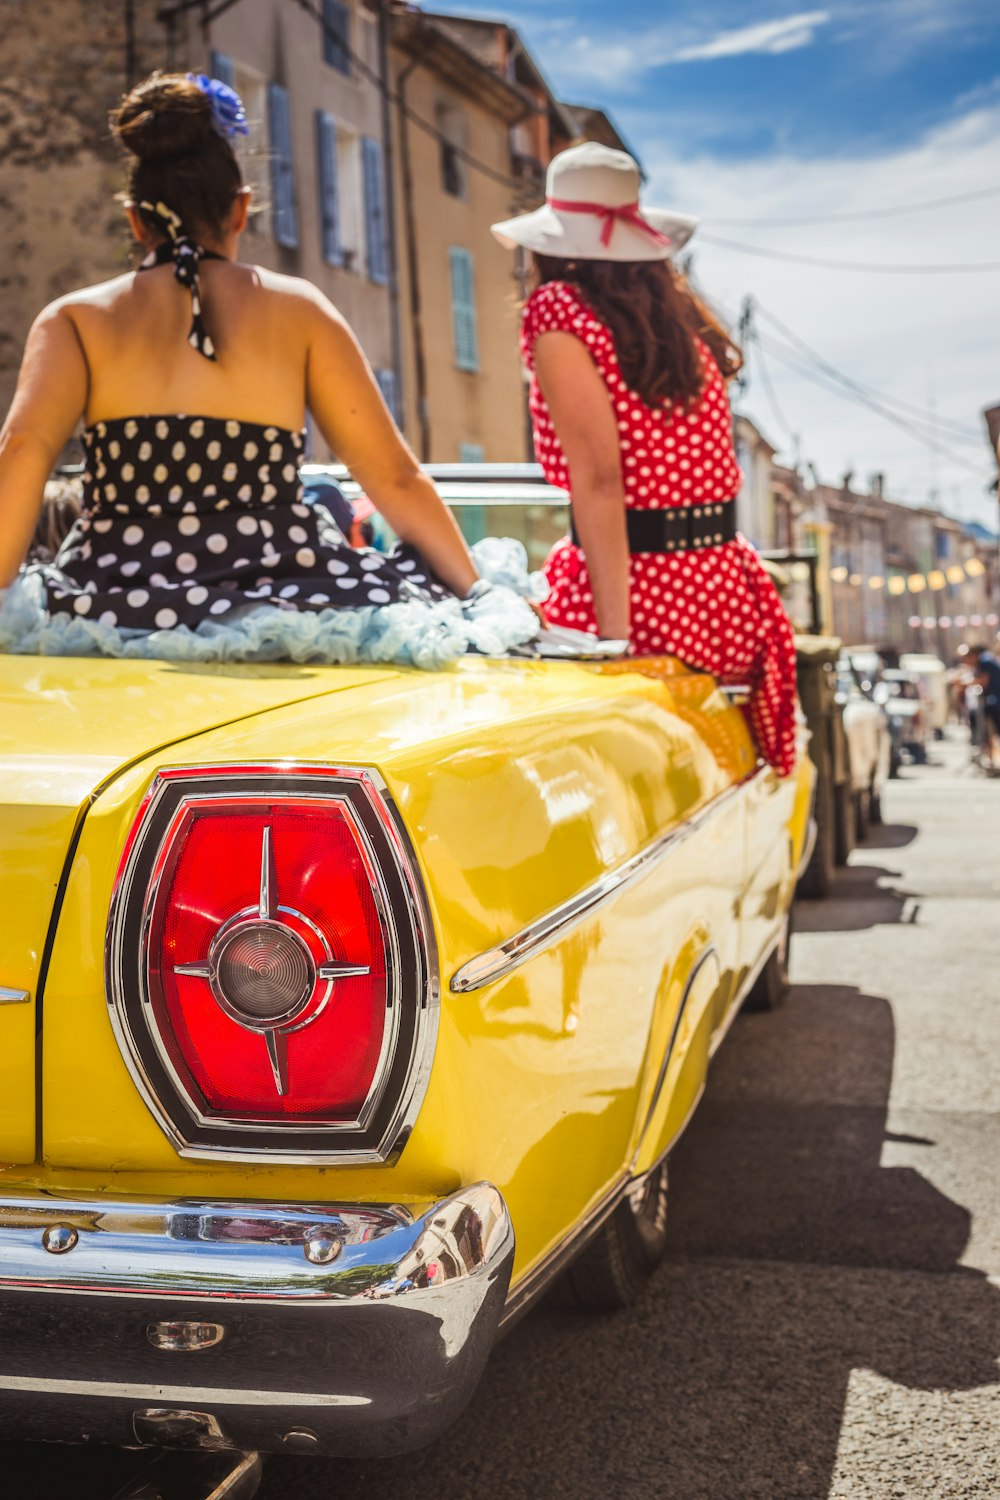 woman in black and white polka dot dress sitting on yellow car hood during daytime